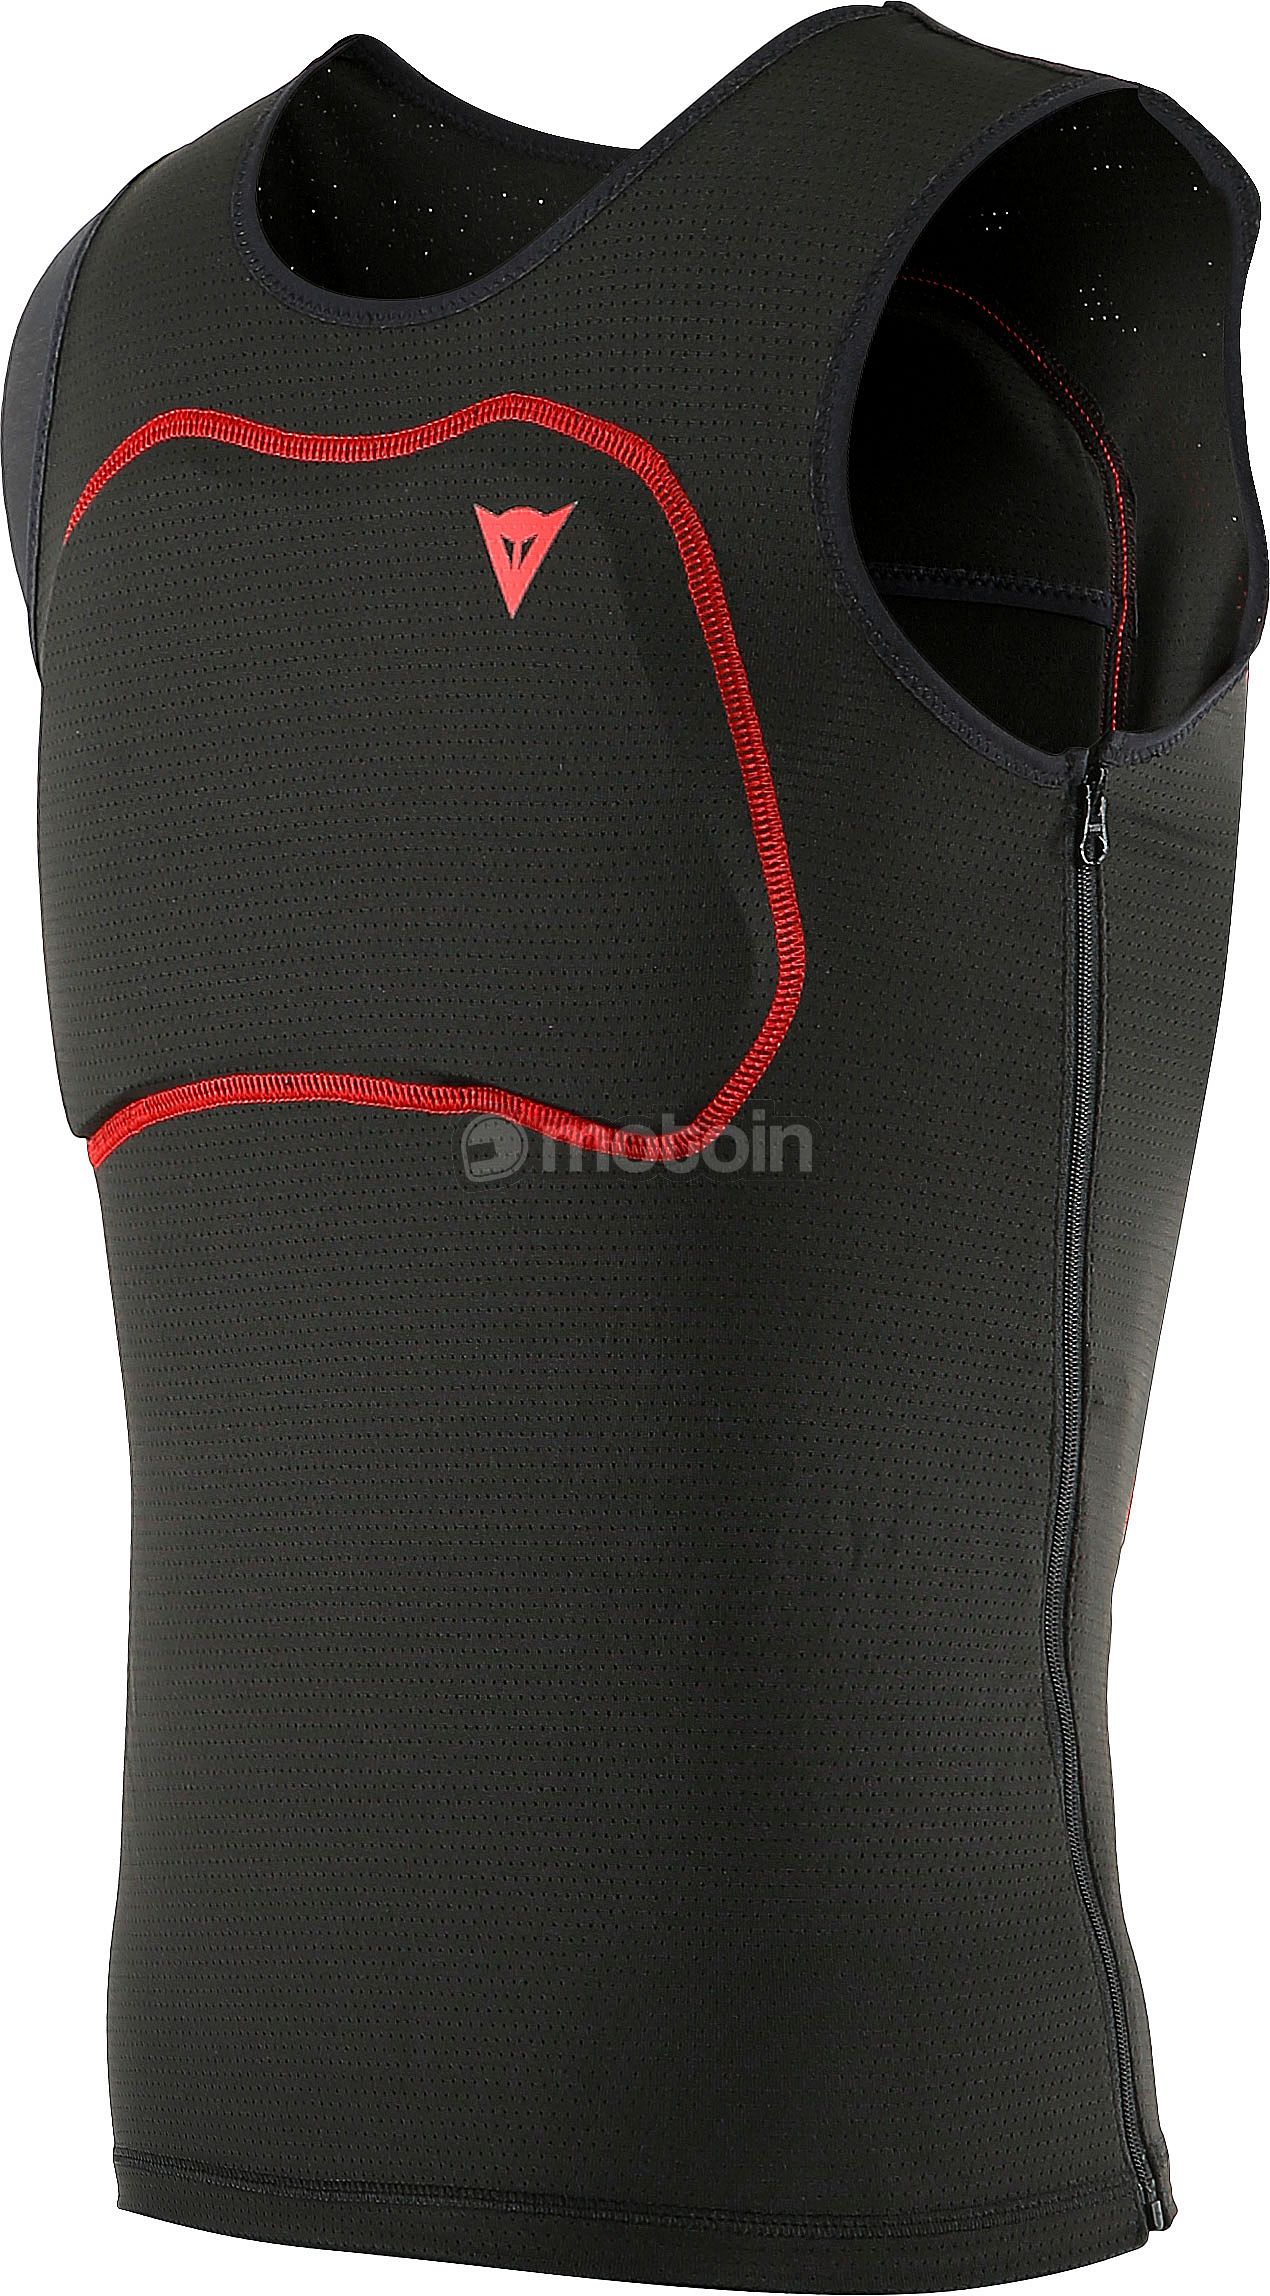 Gilet de protection taille S Dainese